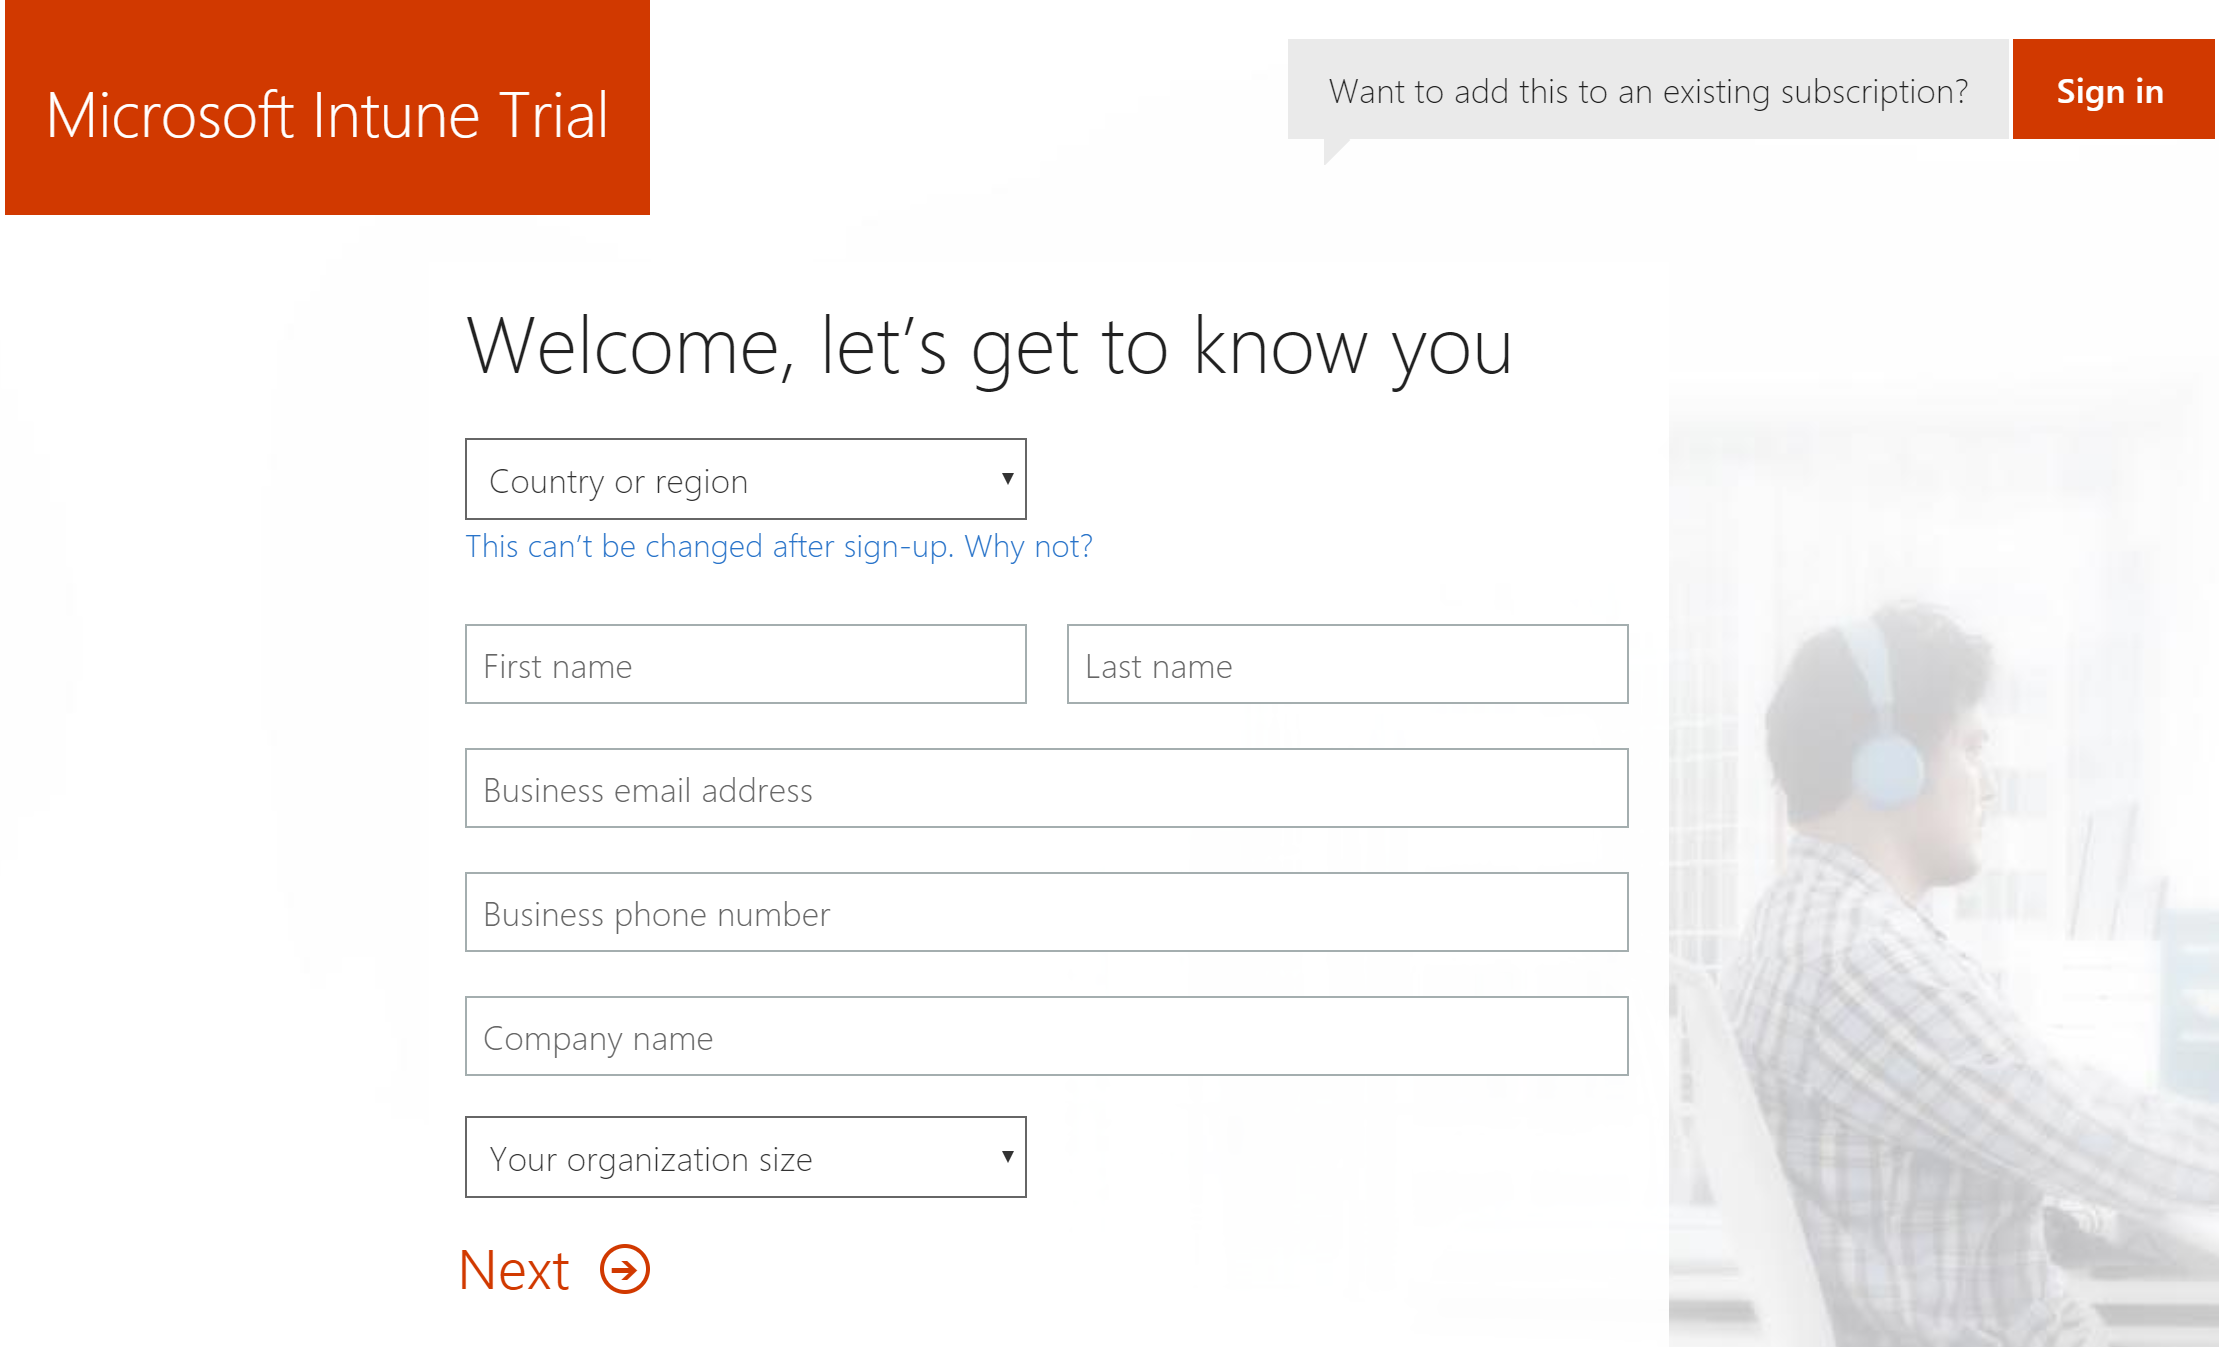 Screenshot of the Microsoft Intune Trial account sign up web page.